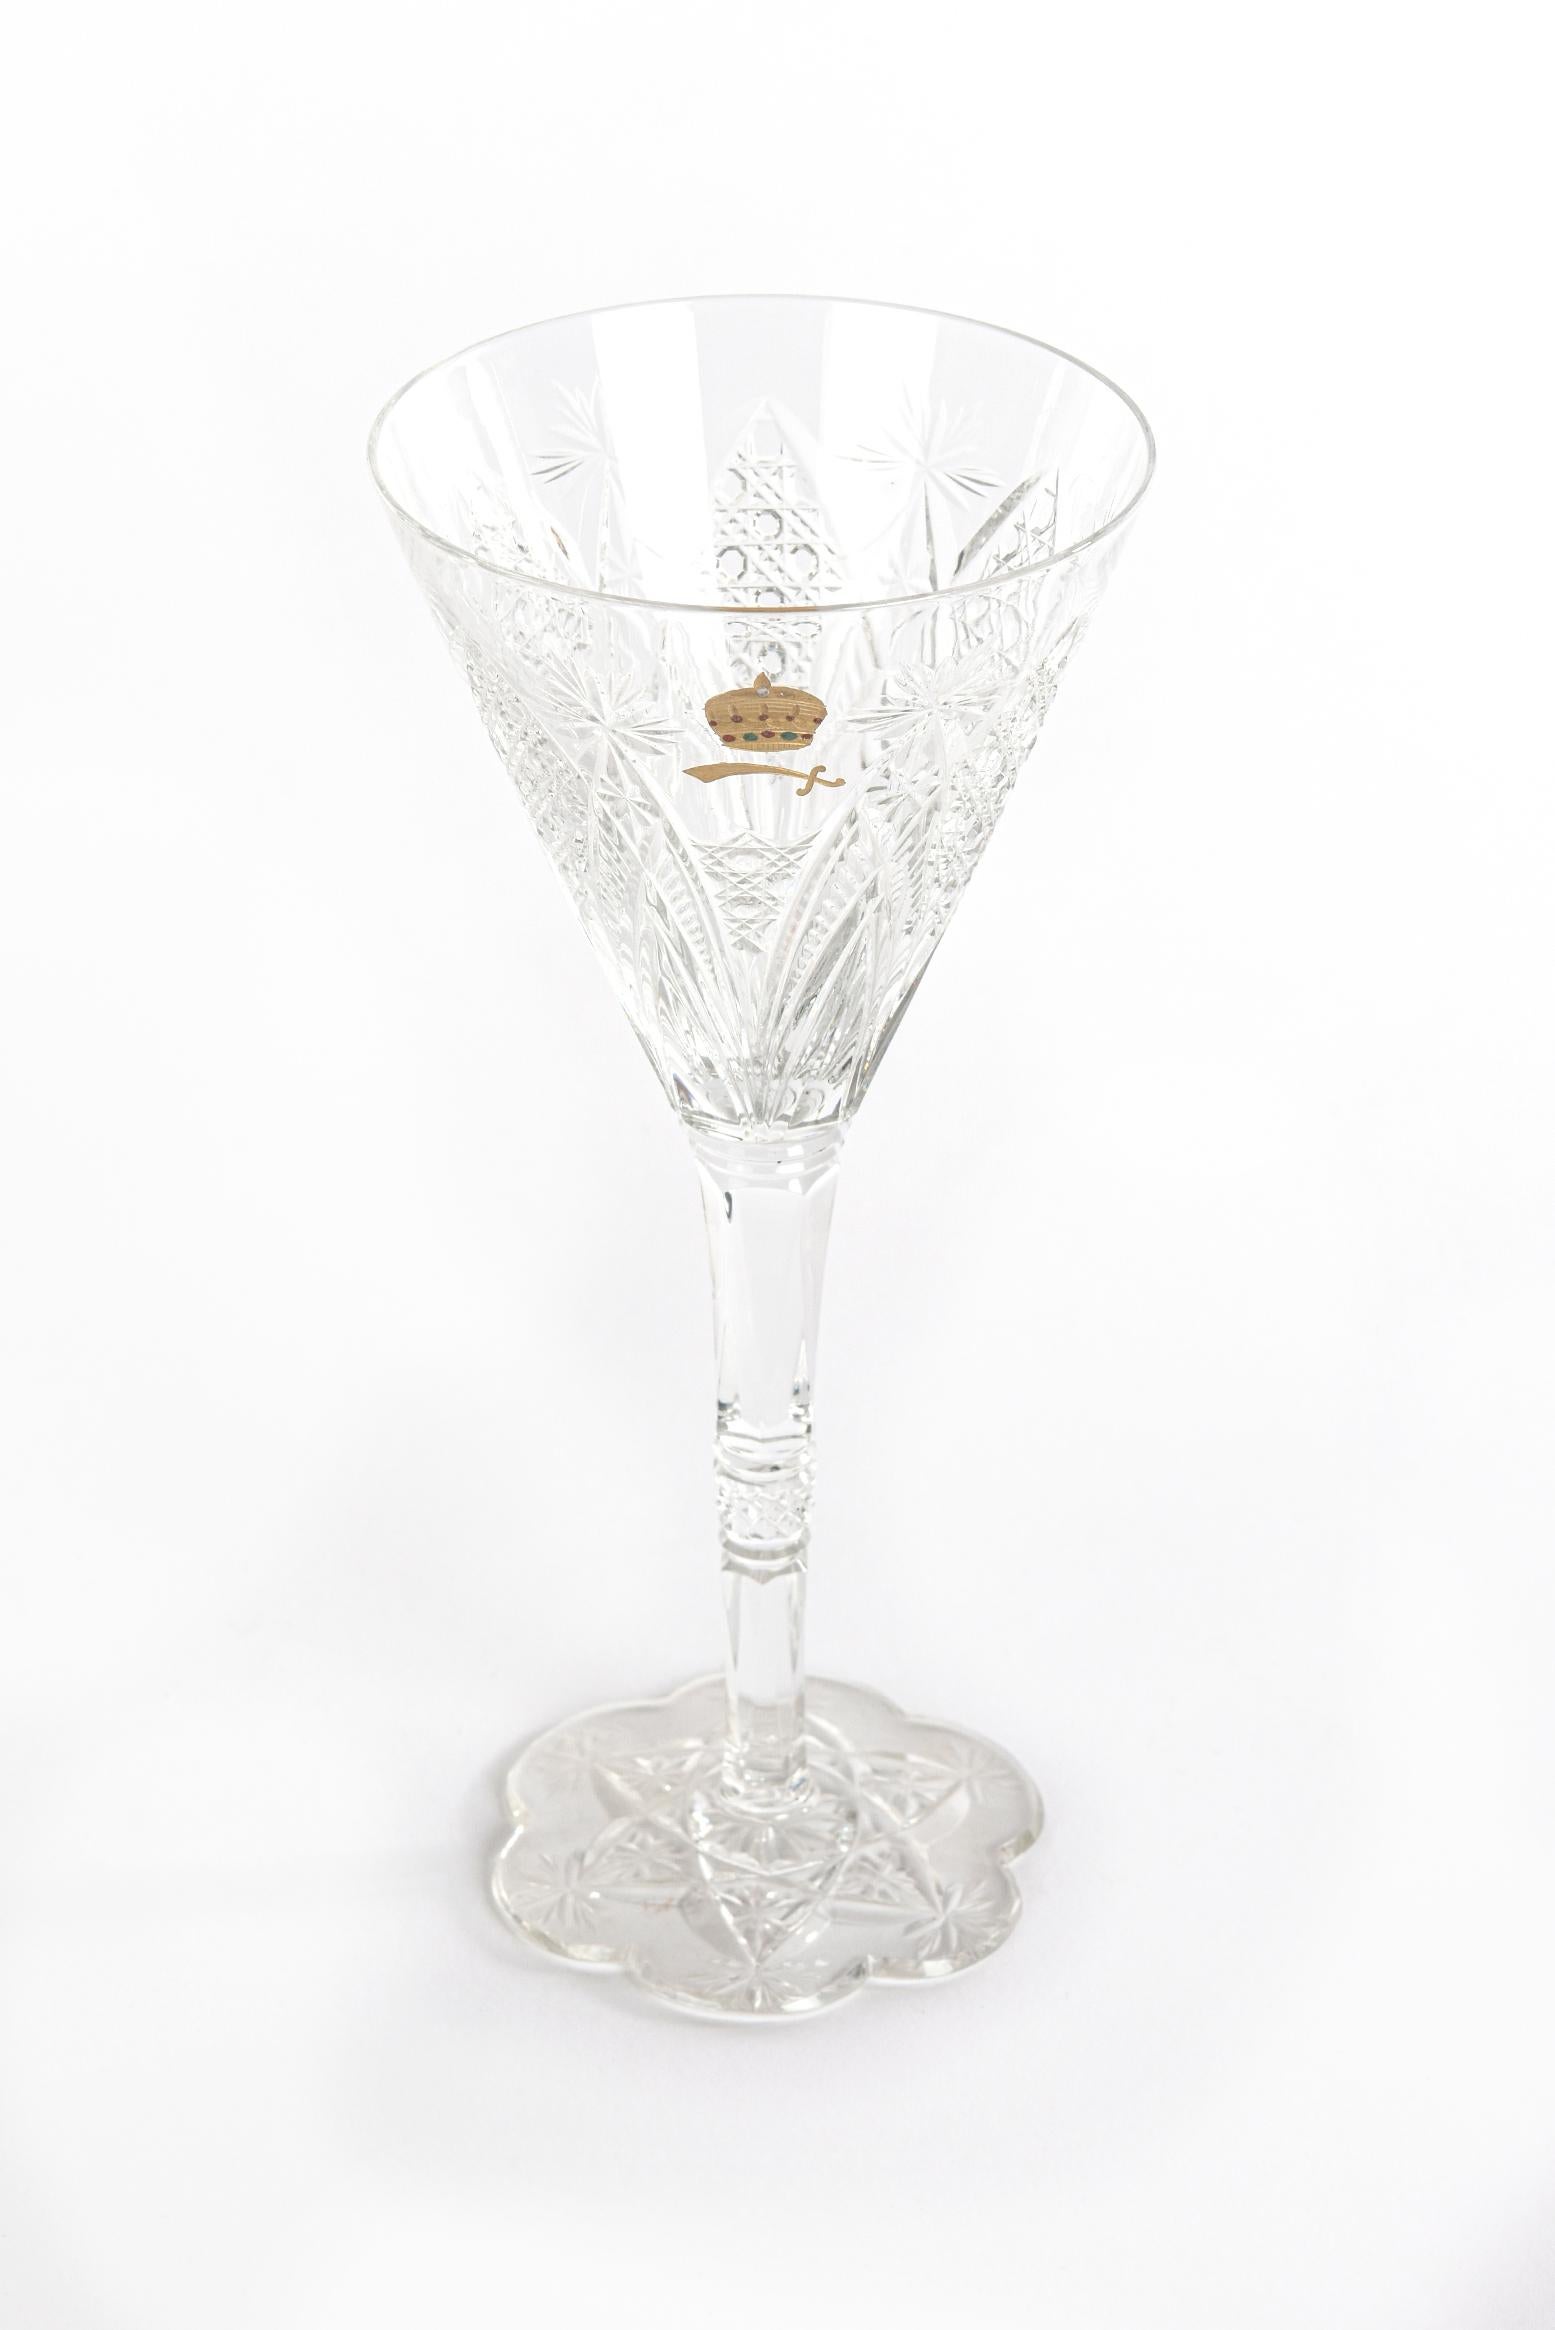 A wonderful opportunity to add to your Museum Quality collection. From France's premier Cristallerie, Baccarat, this hand blown and cut pattern features a diamond fan pattern with an elegant cut stem and fully cut and shaped petal base that simply